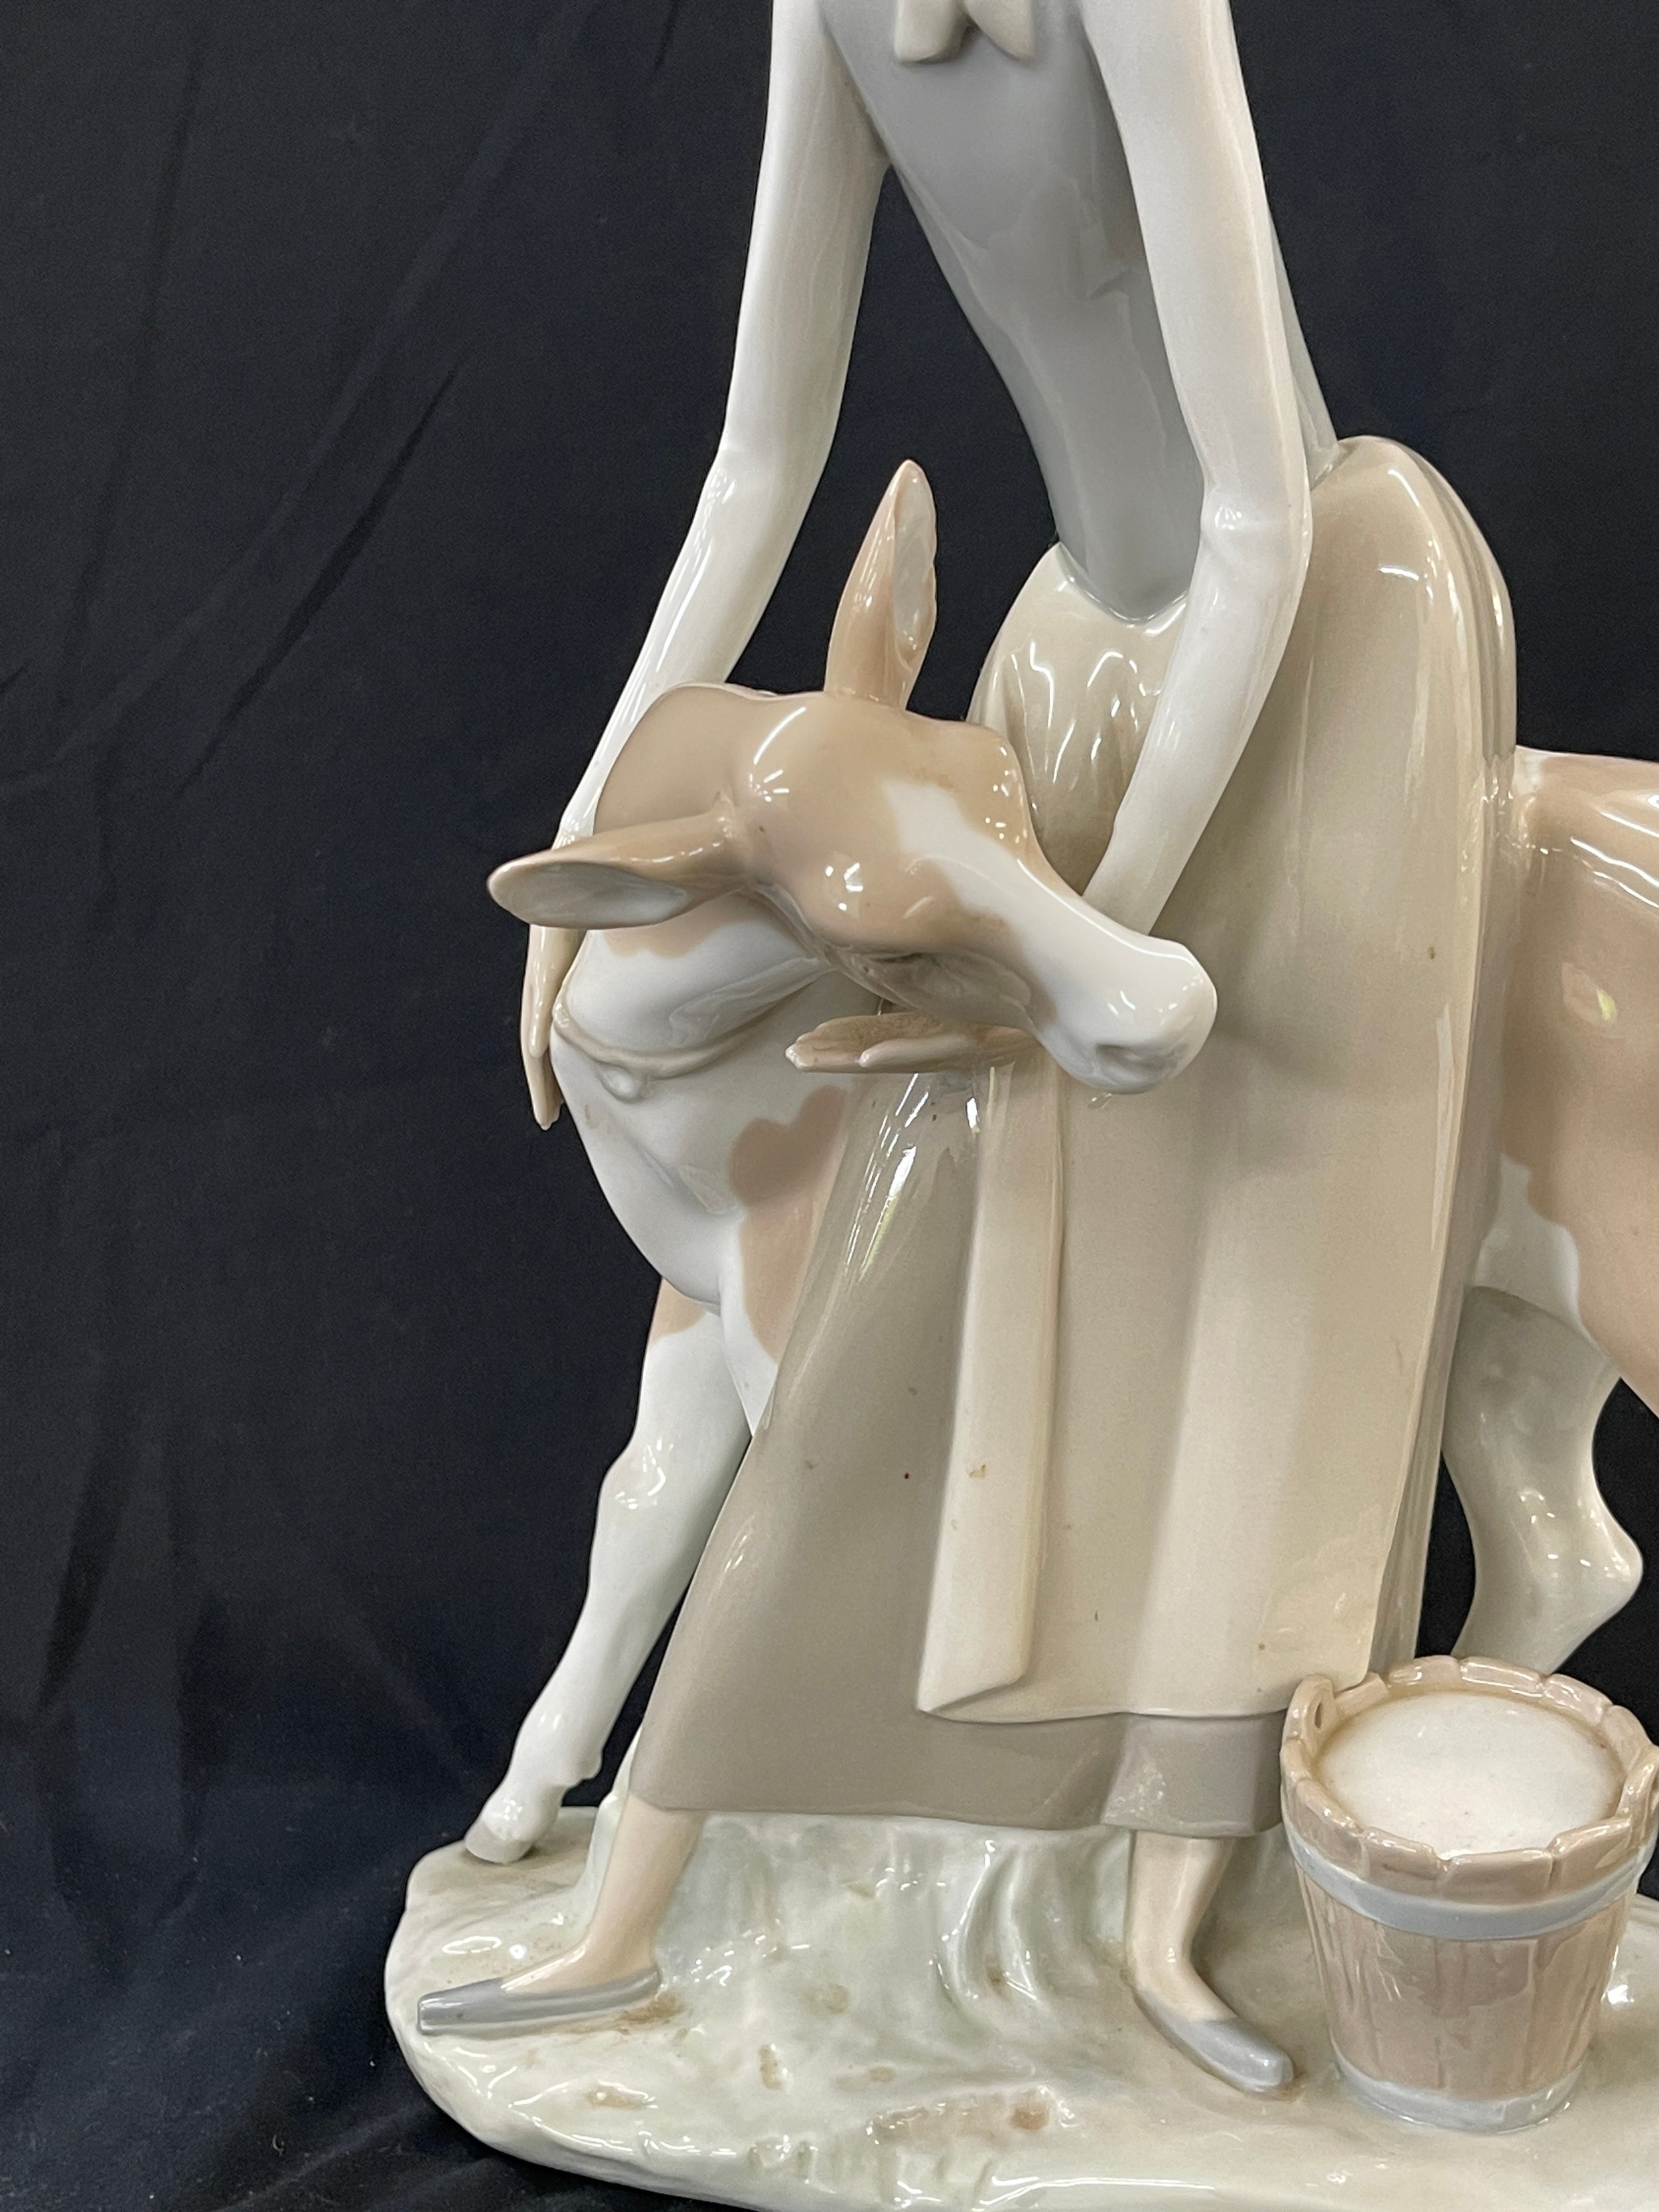 Lladro Porcelain Farmer Girl Miling Cow measures approximately 13 inches tall - Image 5 of 9